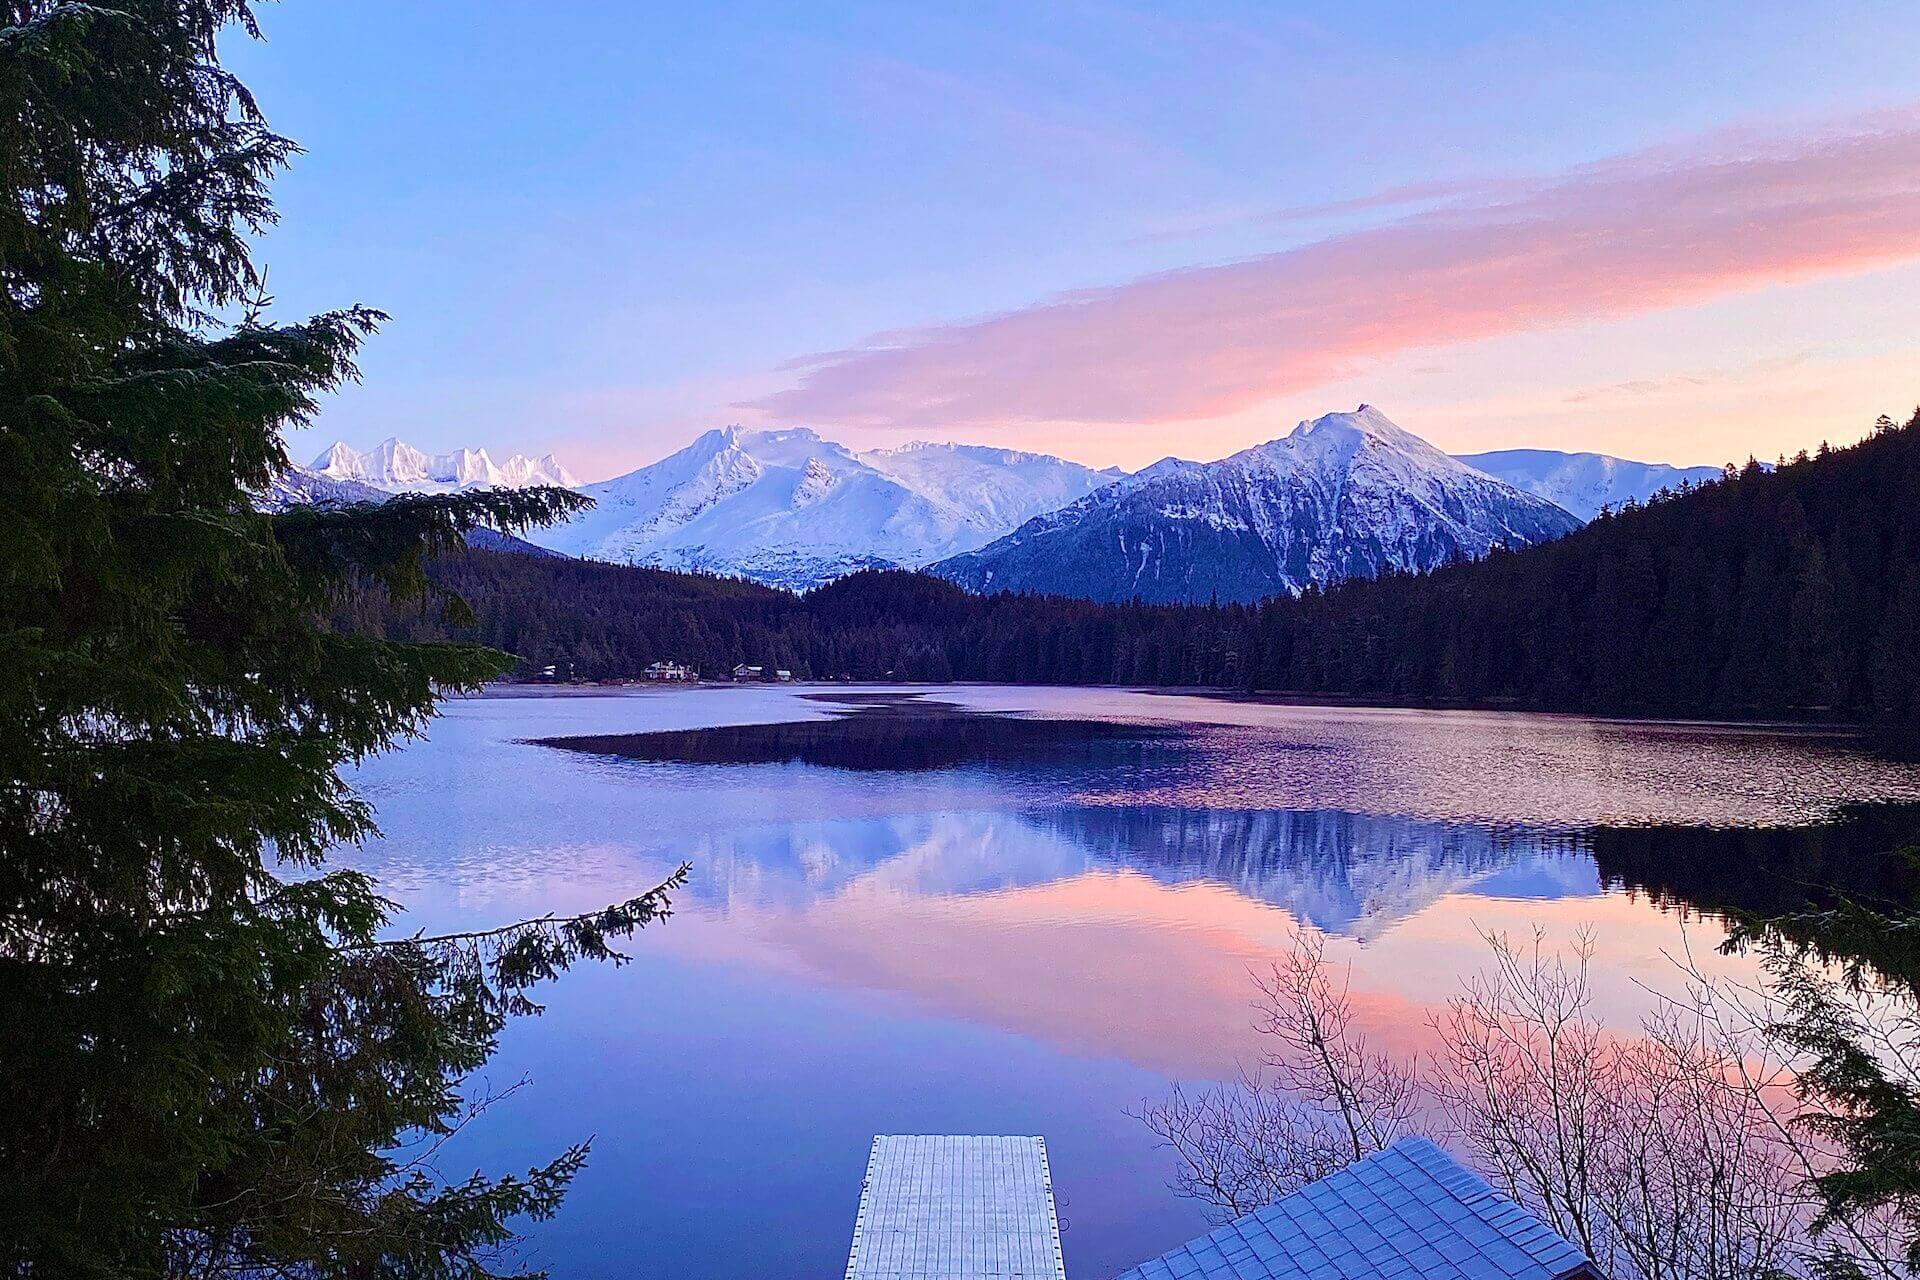 View of the snowy mountains and lake in Alaska